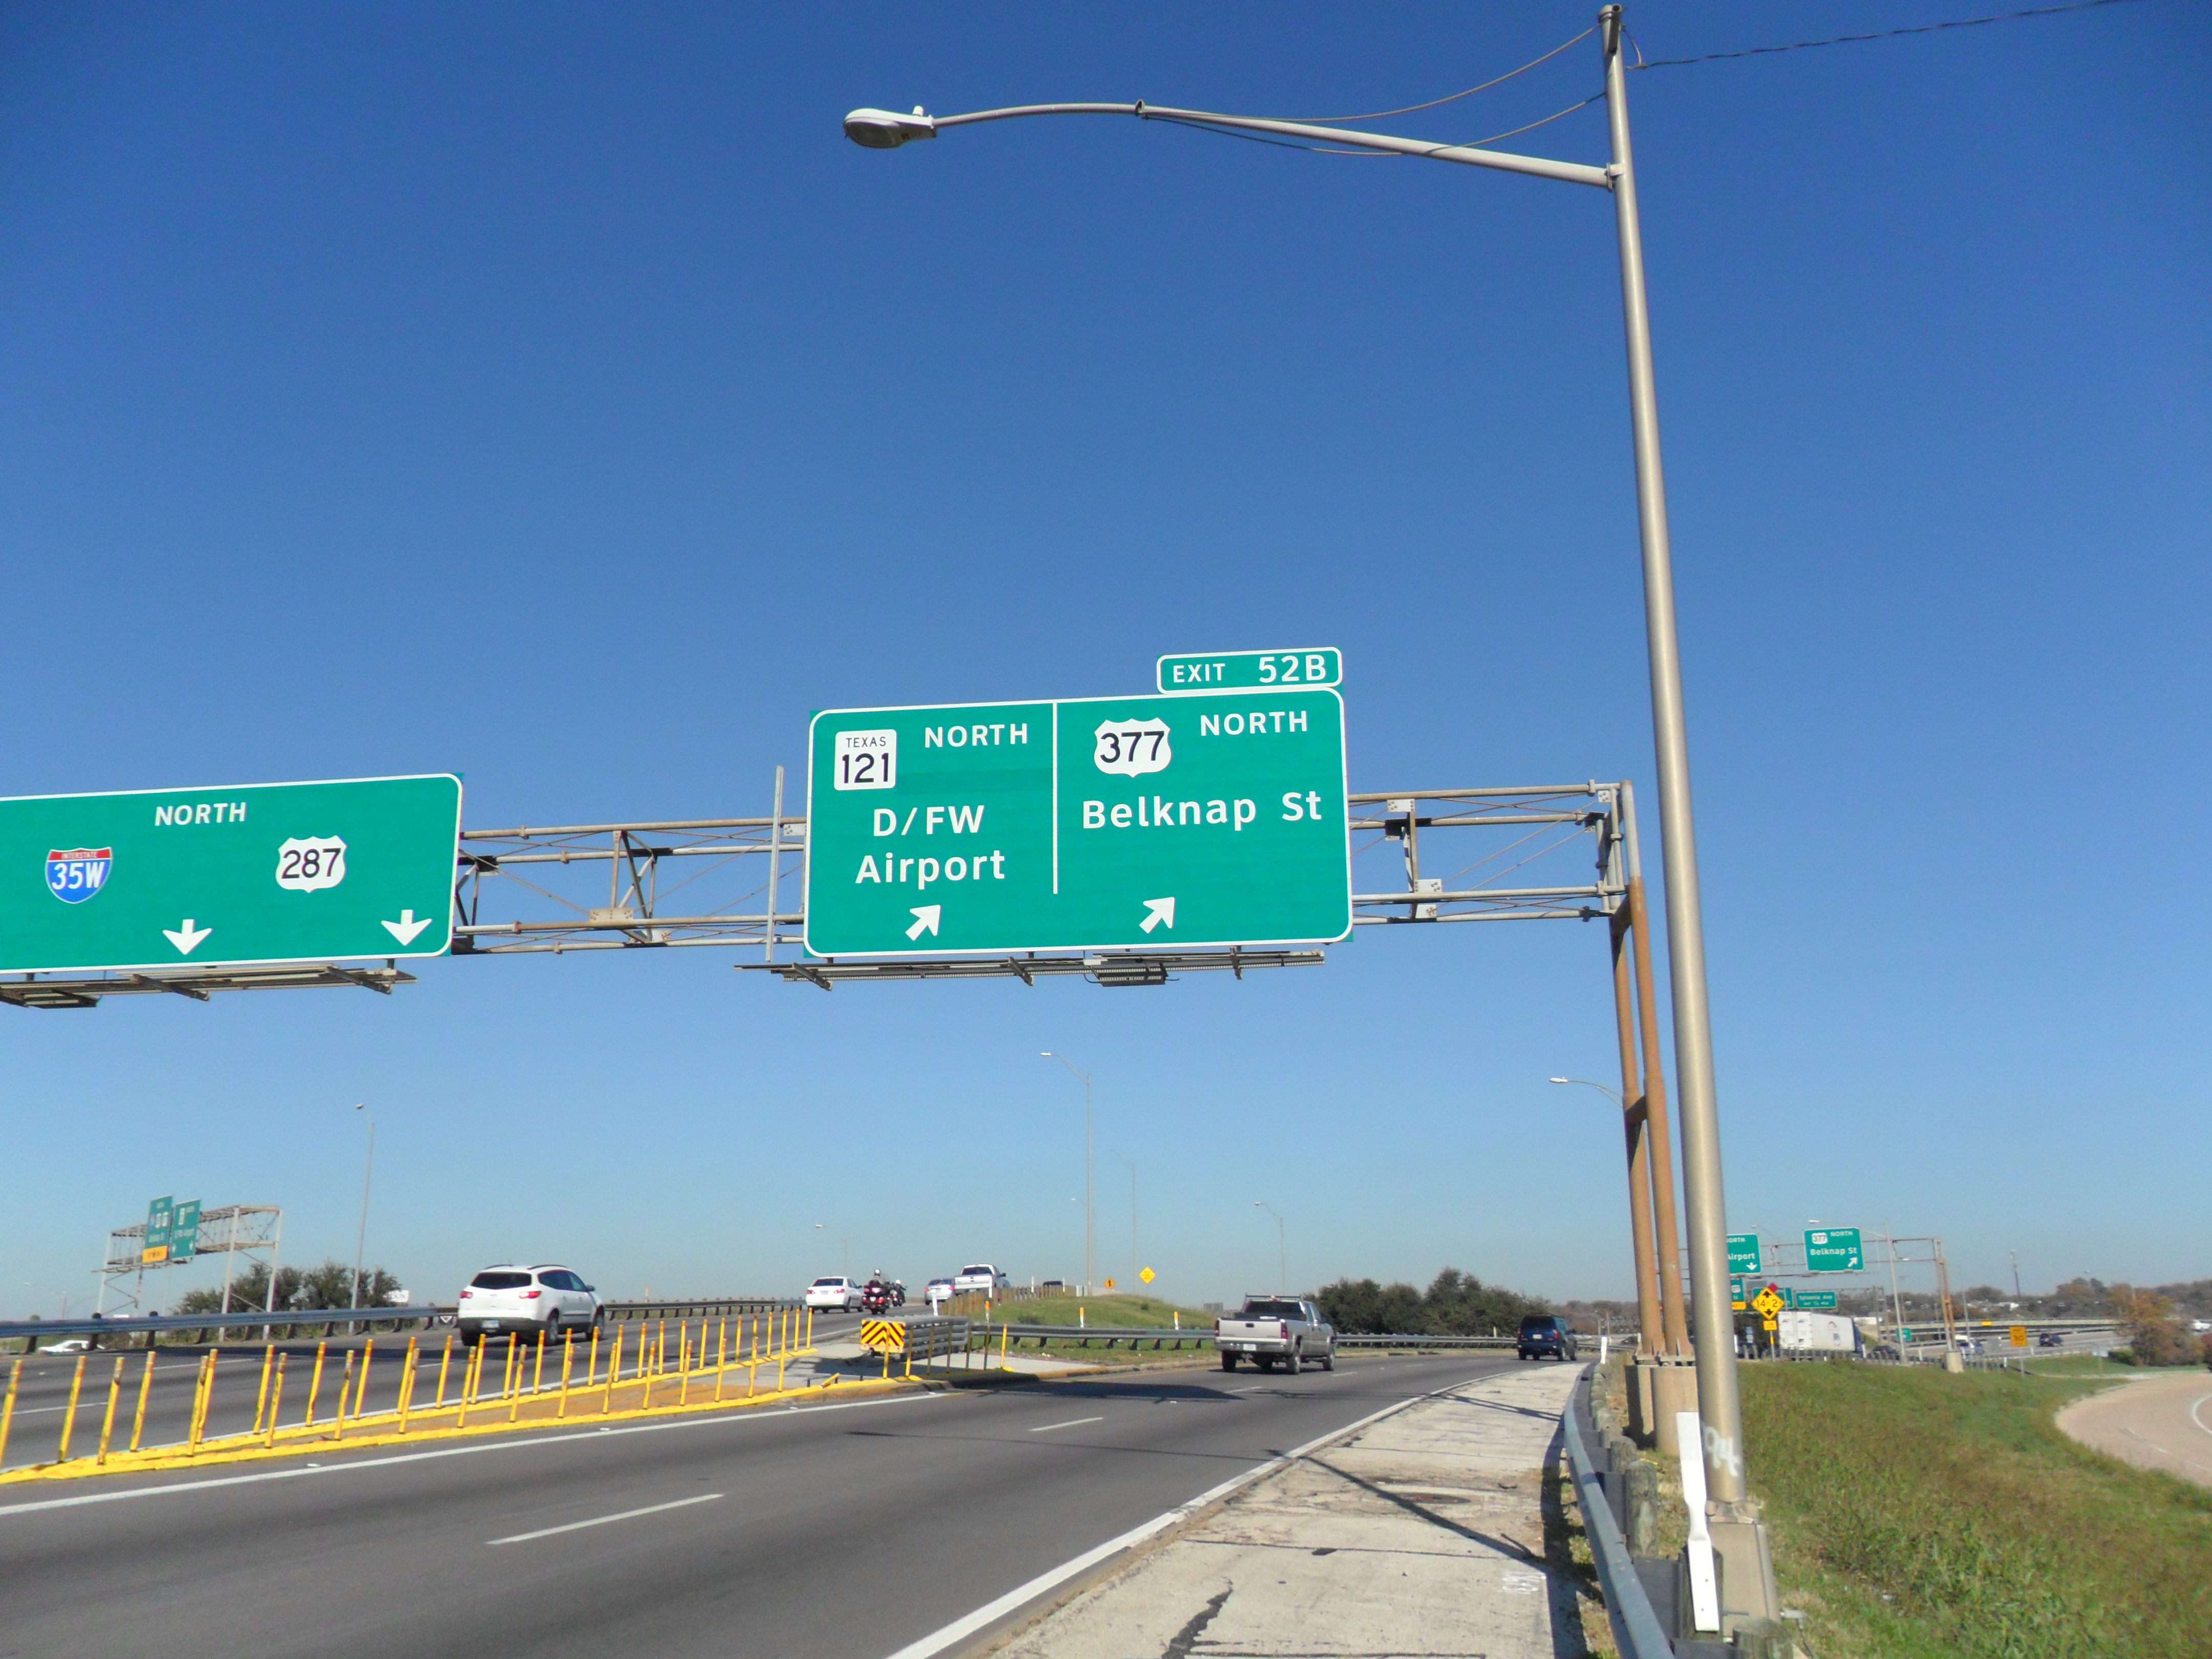 entering from I-35 north